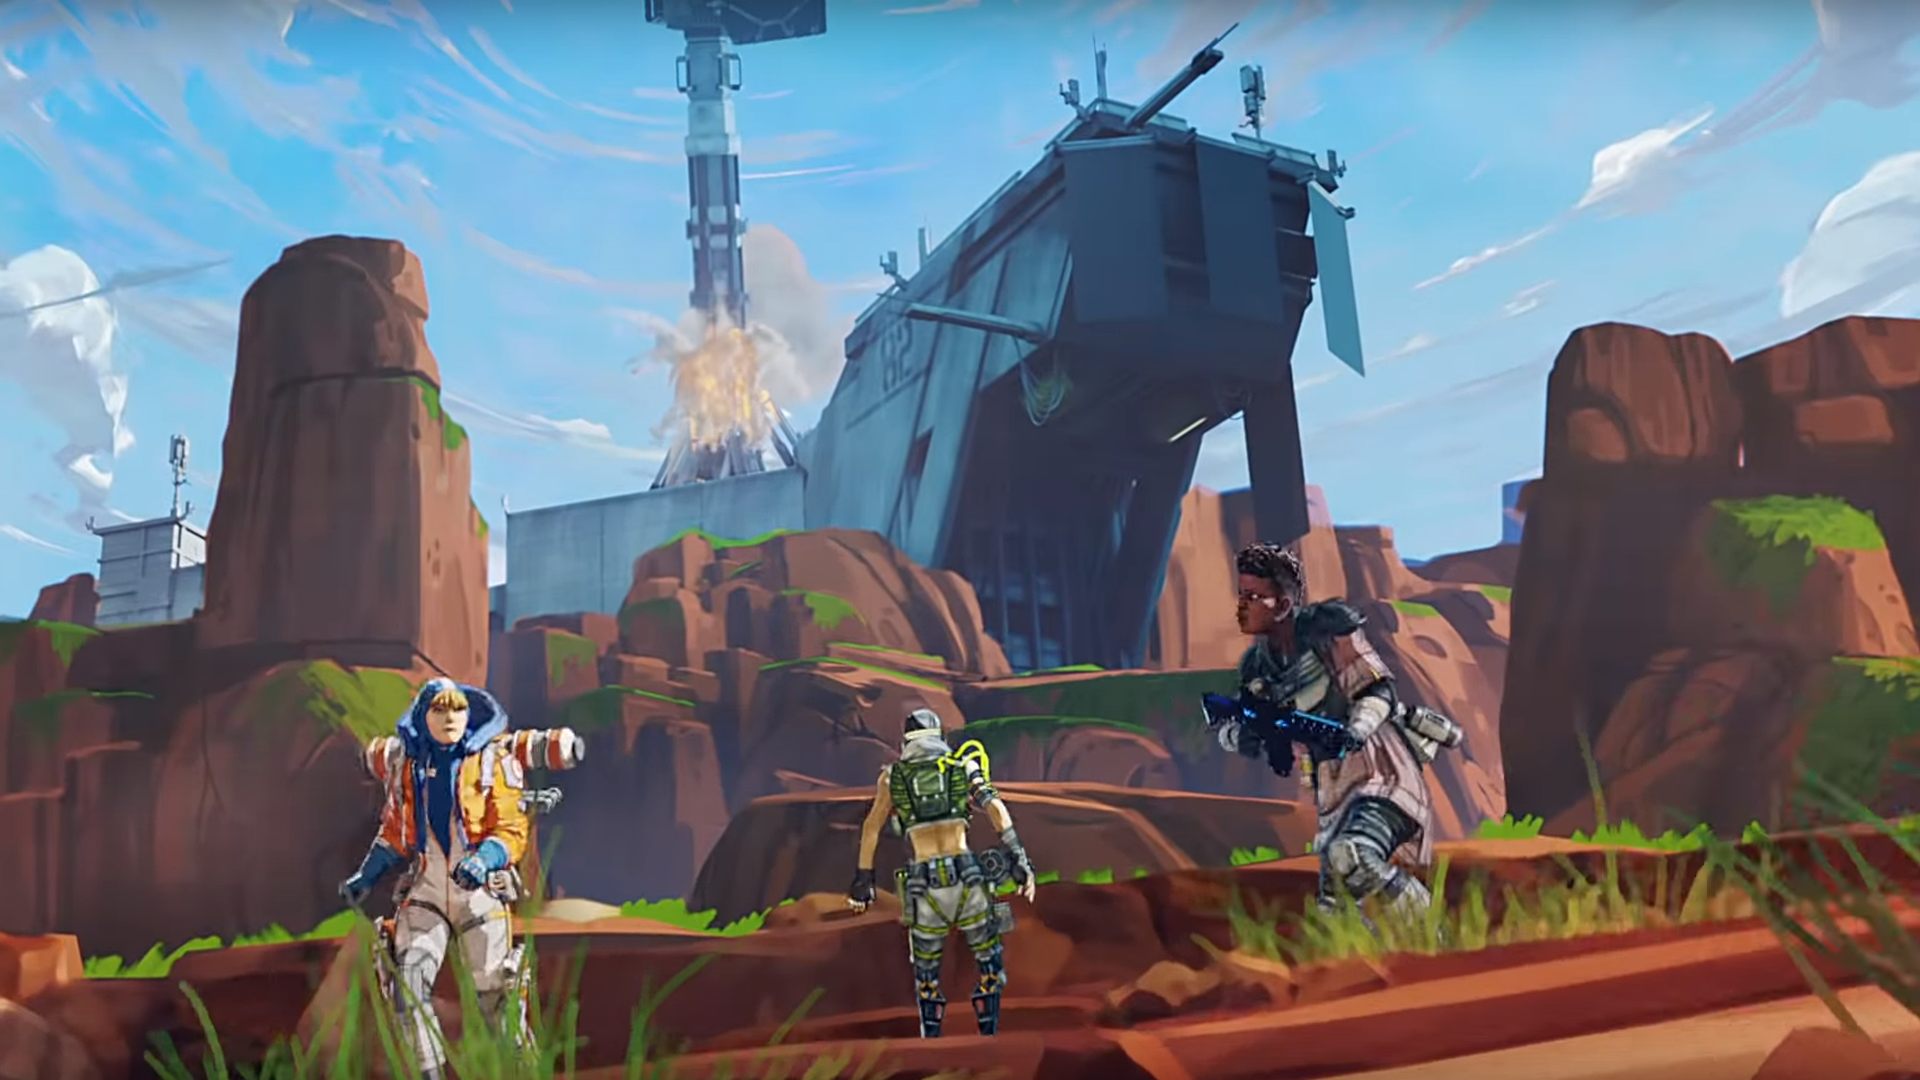 Apex Legends Season 4: Release Date, Trailer, Characters, Weapons, and News